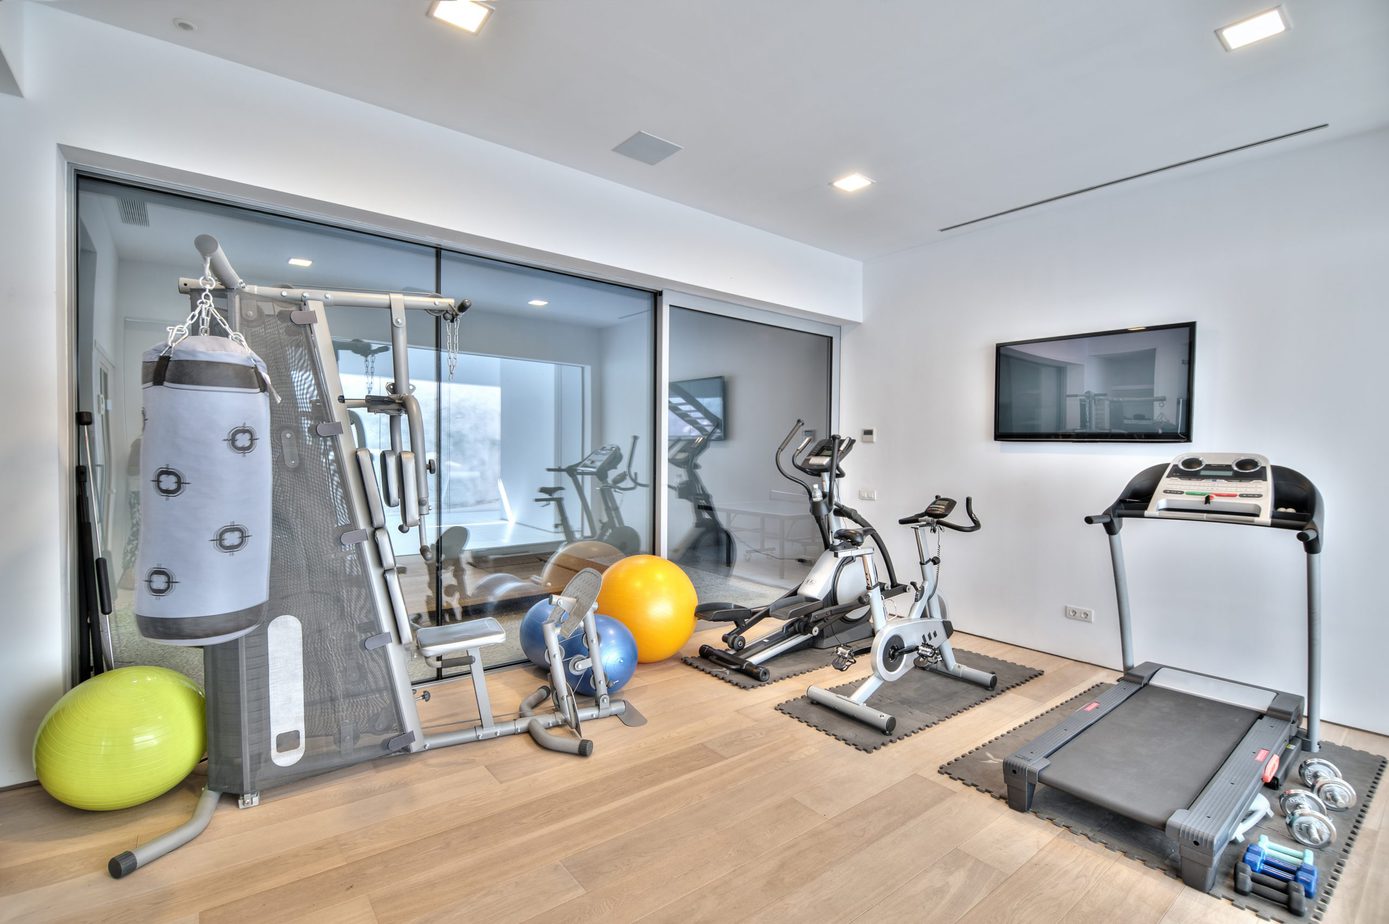 Gym at home – a list of the most important equipment